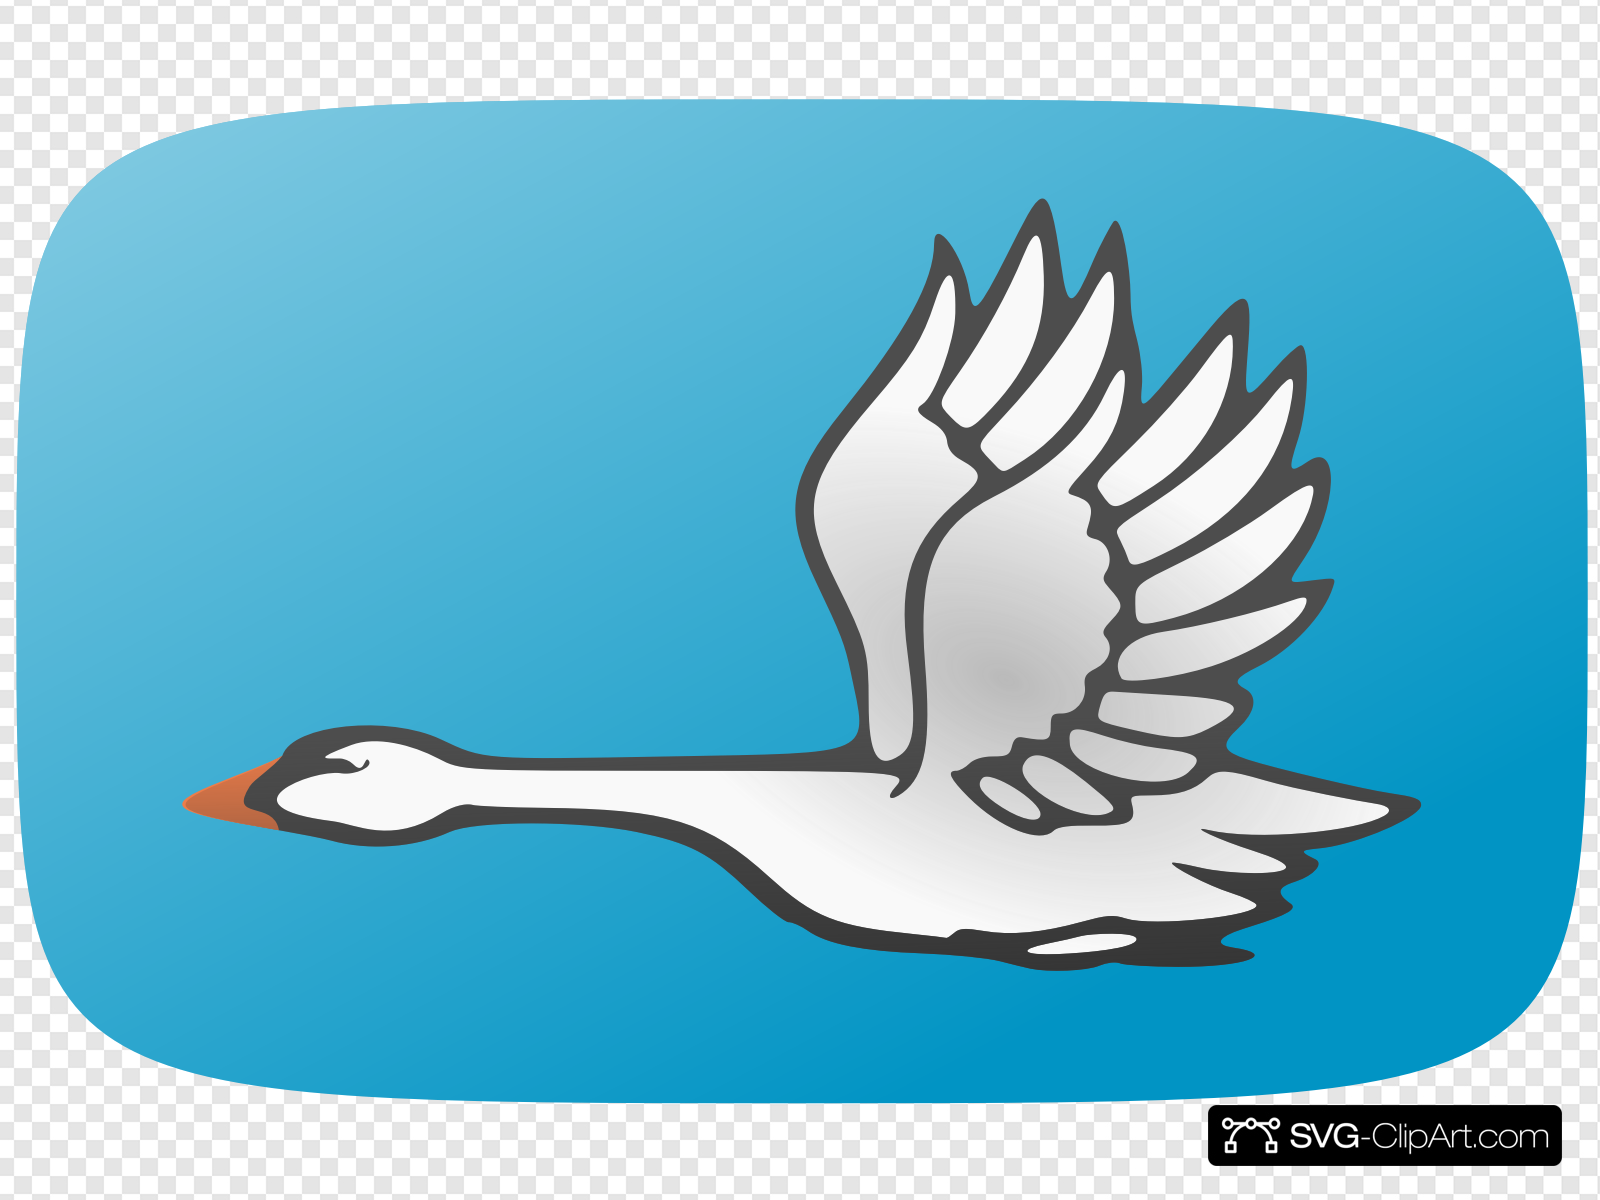 Flying Swan Clip art, Icon and SVG